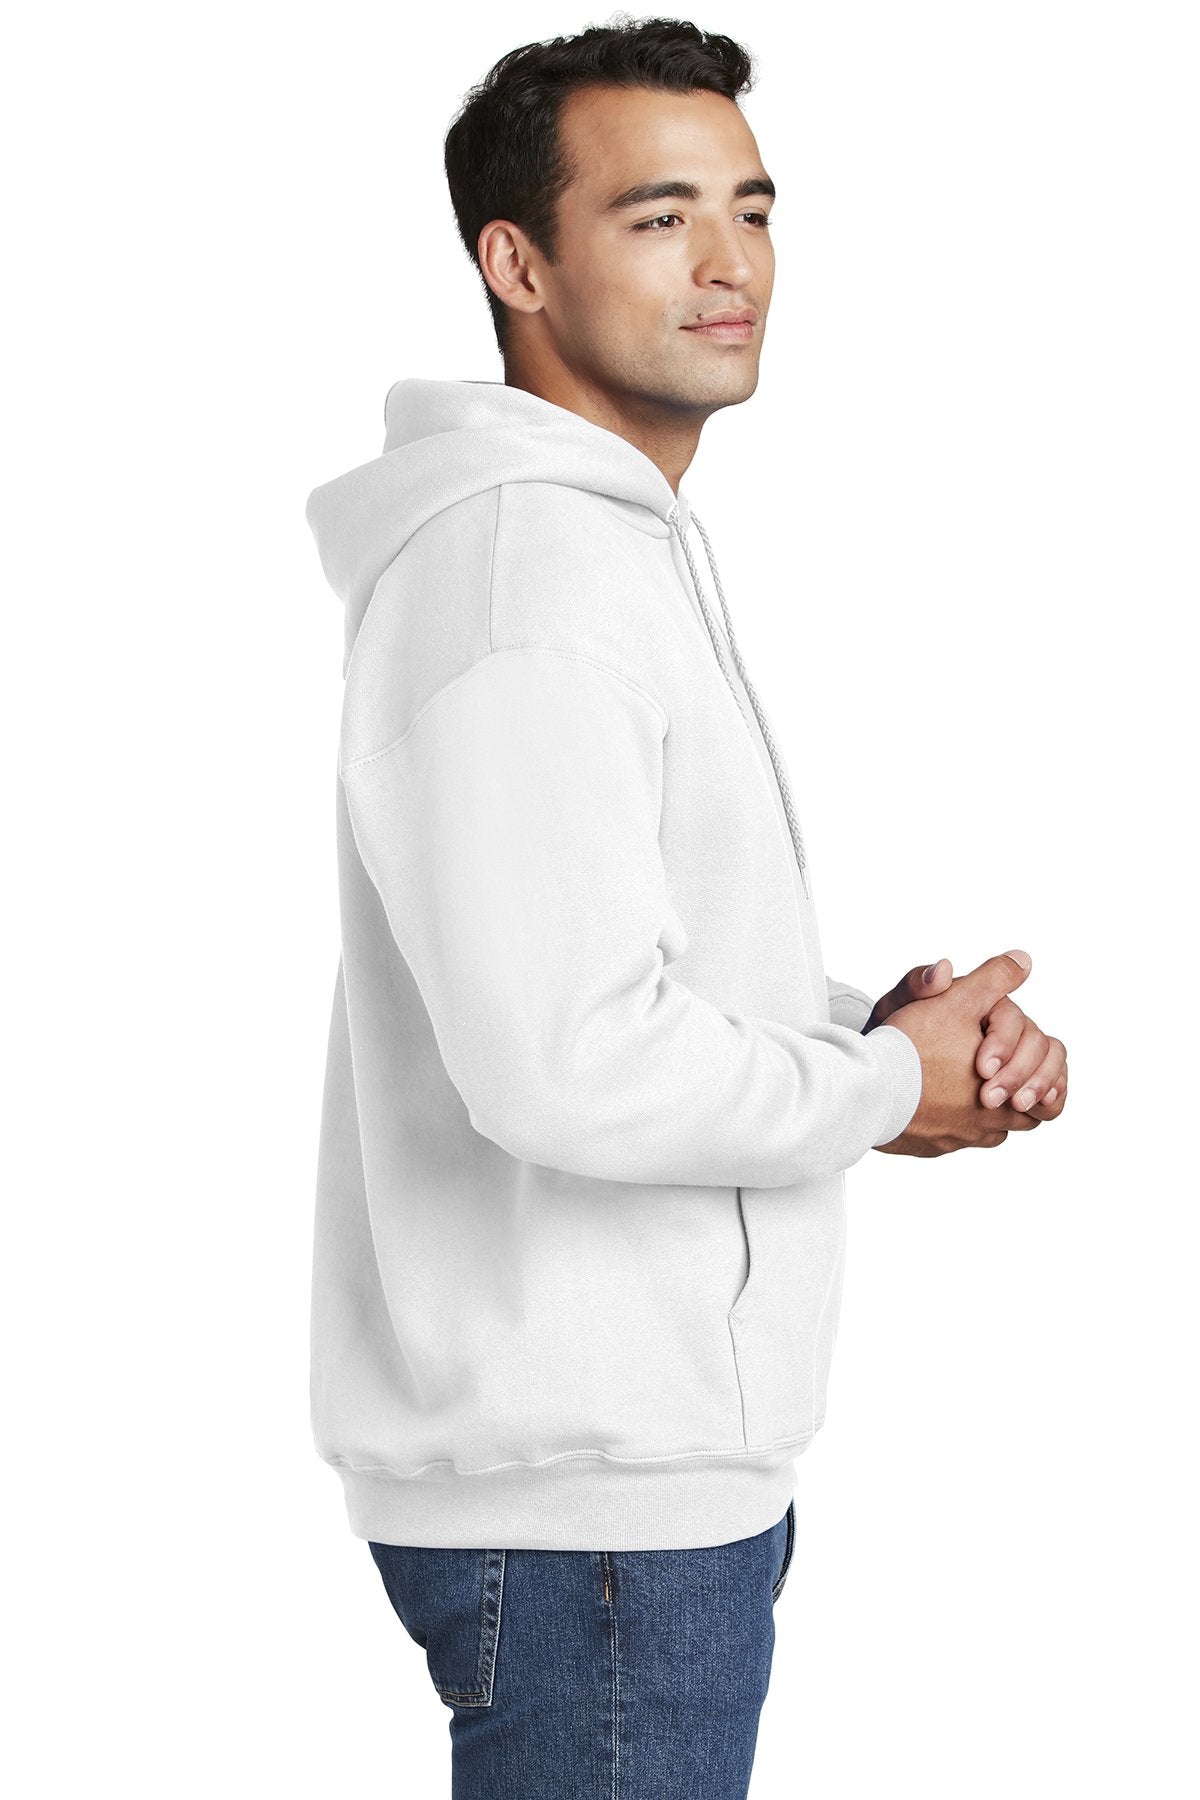 Hanes Ultimate Cotton Pullover Hooded Sweatshirt F170 White